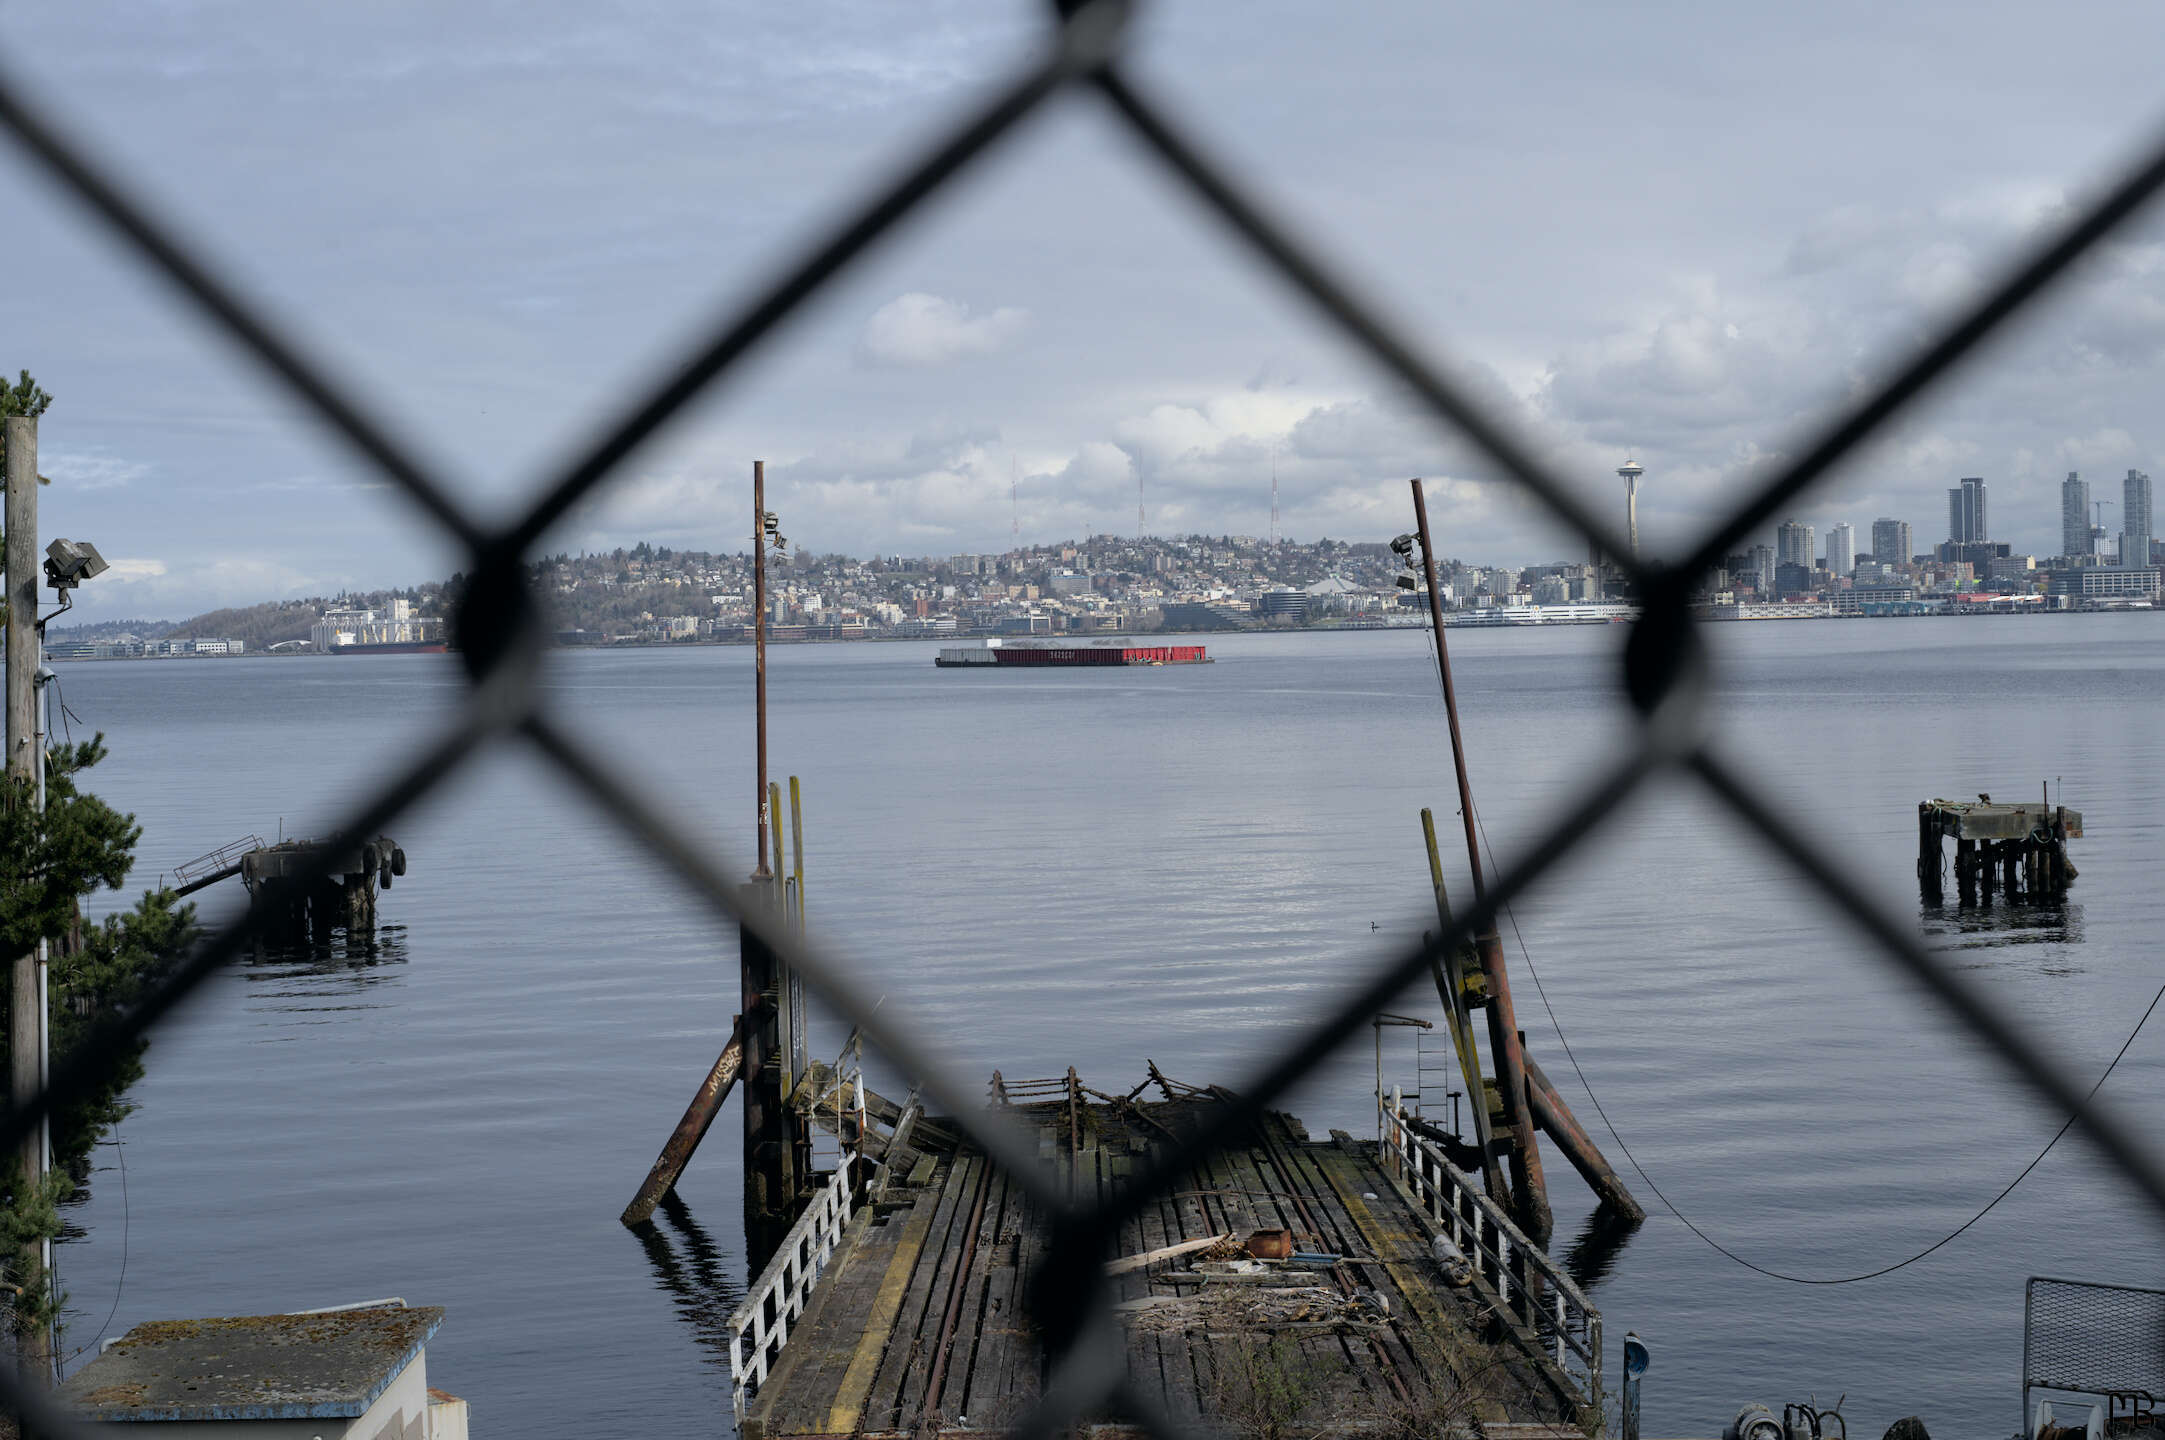 Floating red barge through a chain link fence